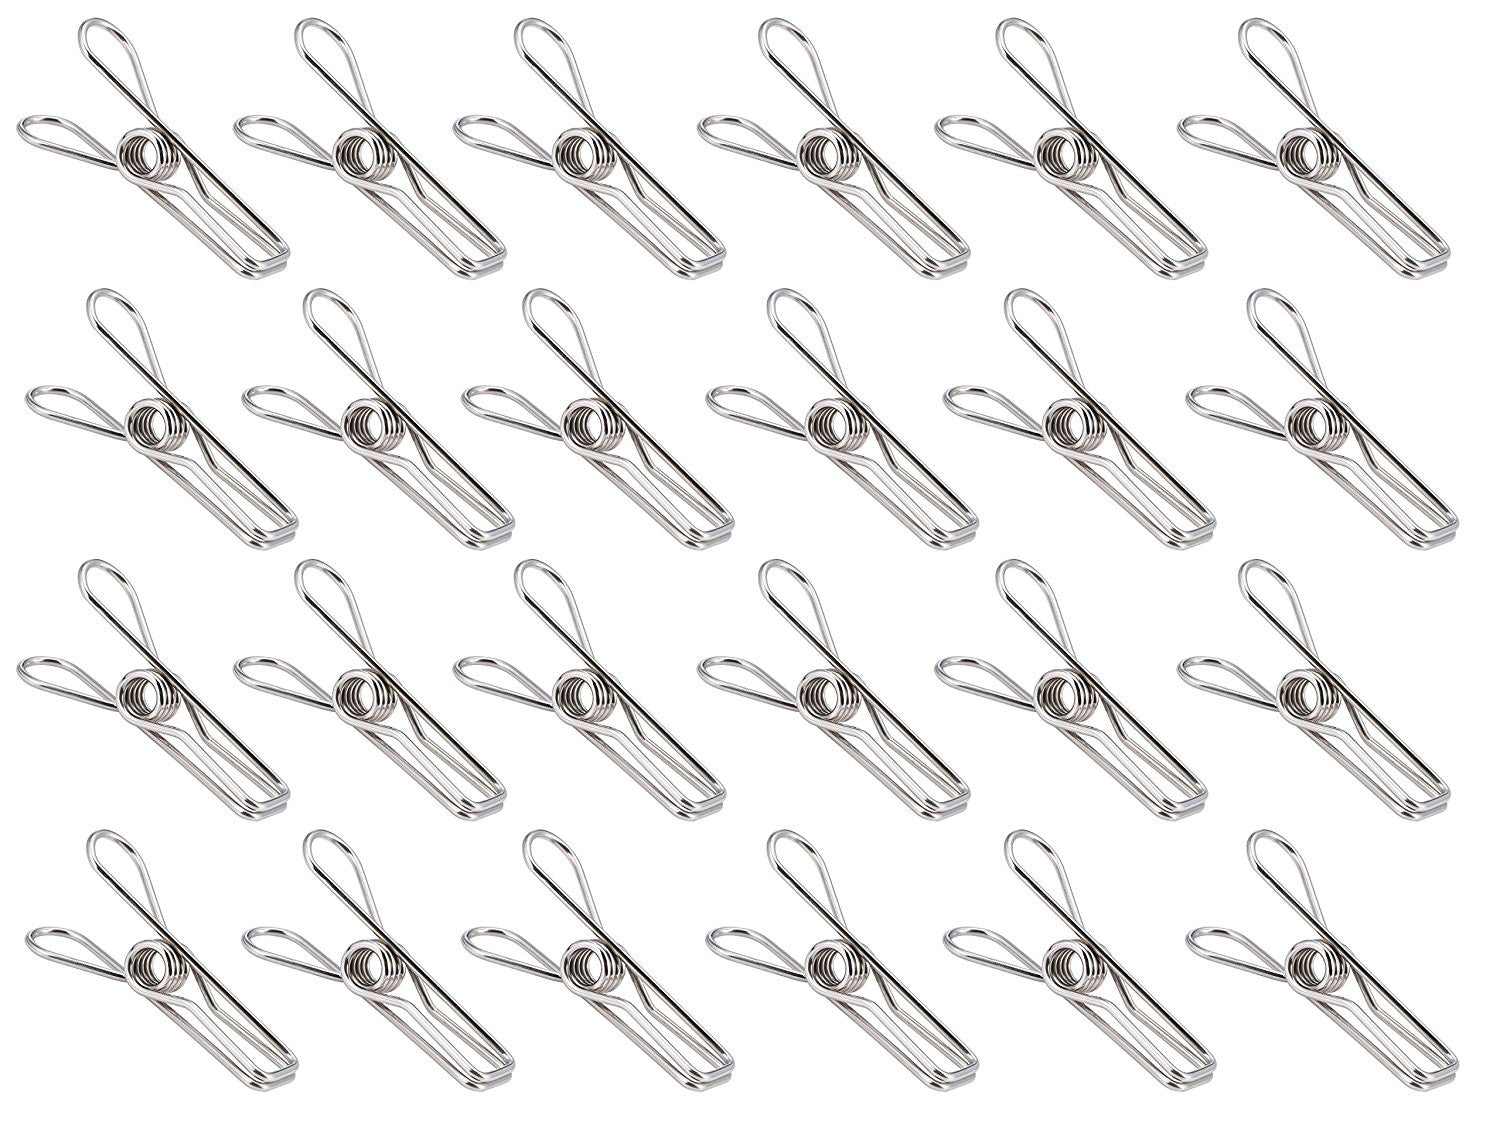 Laundry Clothes Pins - Clothesline Clips - Travel Clothes Line Stainless  Steel Wire Metal Laundry Clip - Set Of